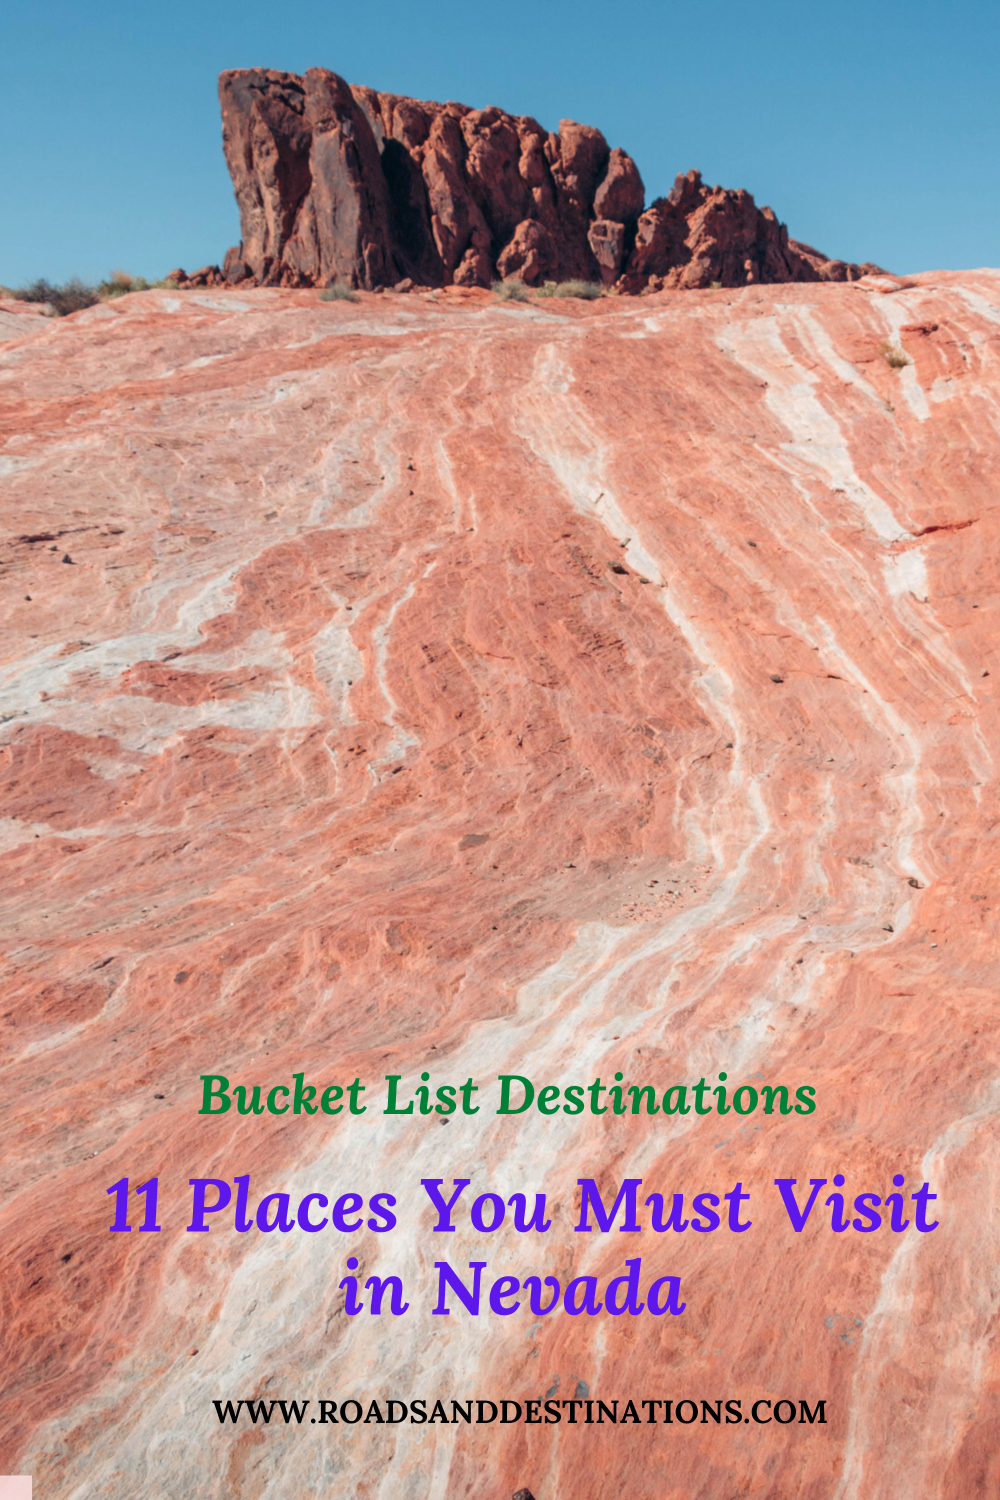 Bucket list destinations to visit in Nevada -   Roads and Destinations